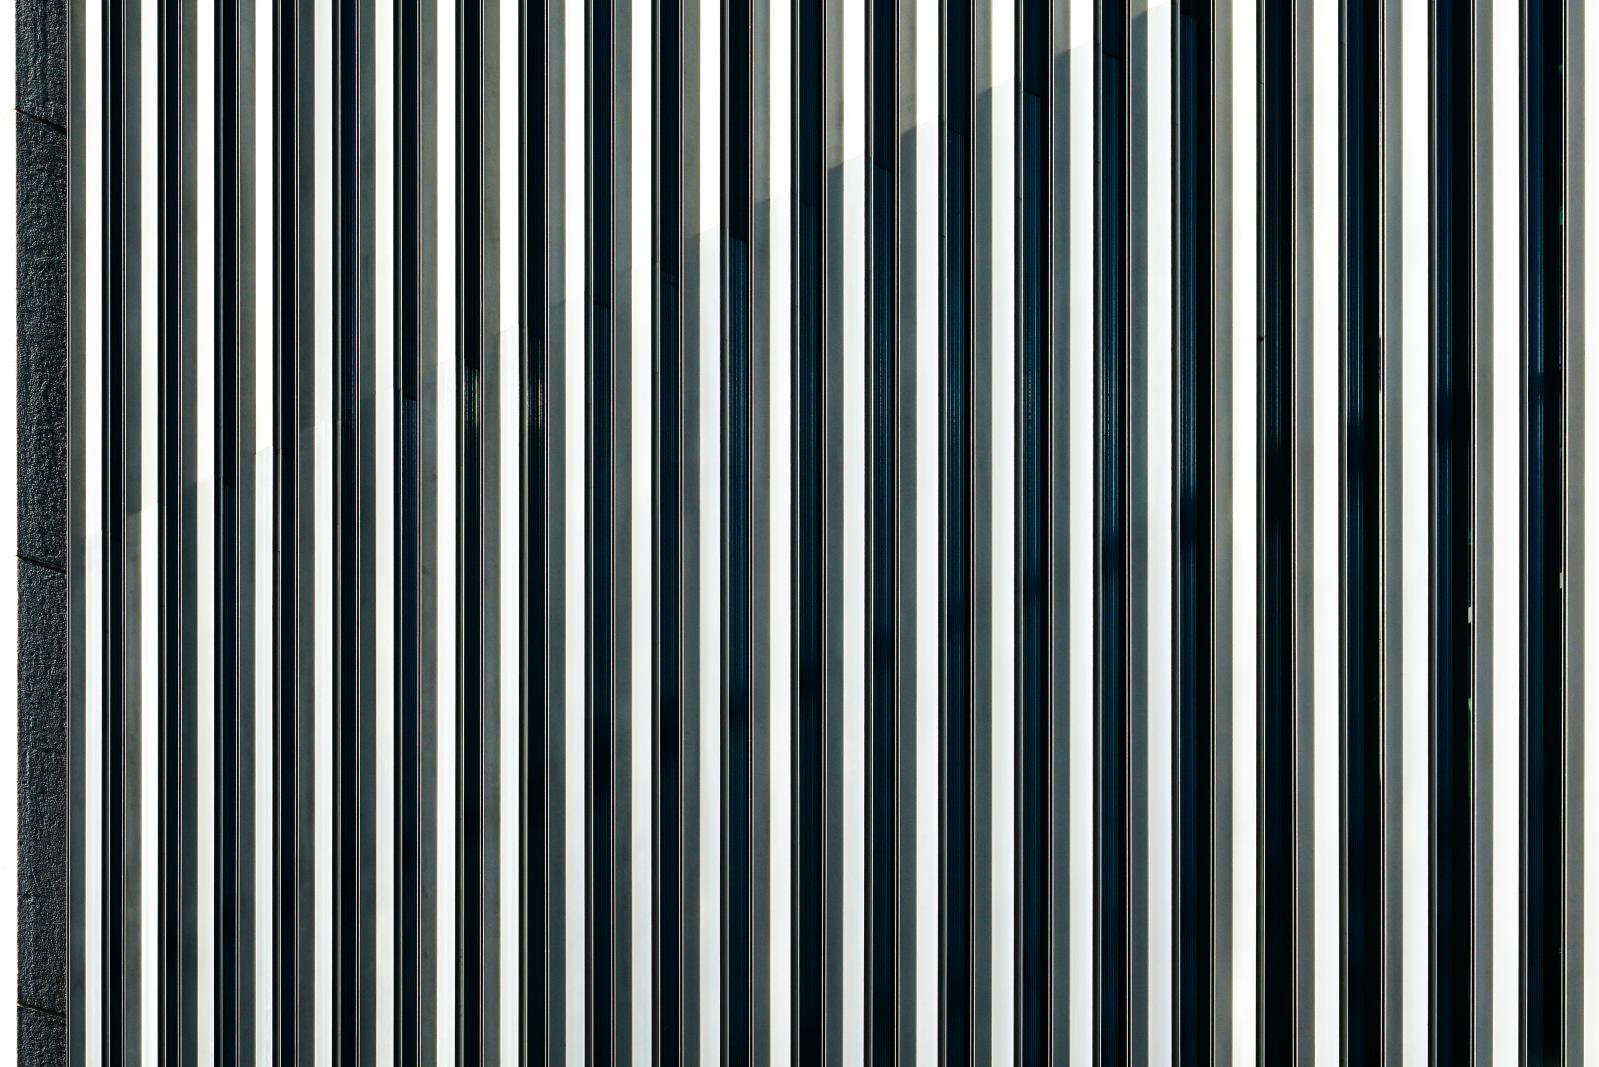 Image from New Photographs -  Wiesbaden, Germany  # 4184 8/2023 Urban Stripes:...